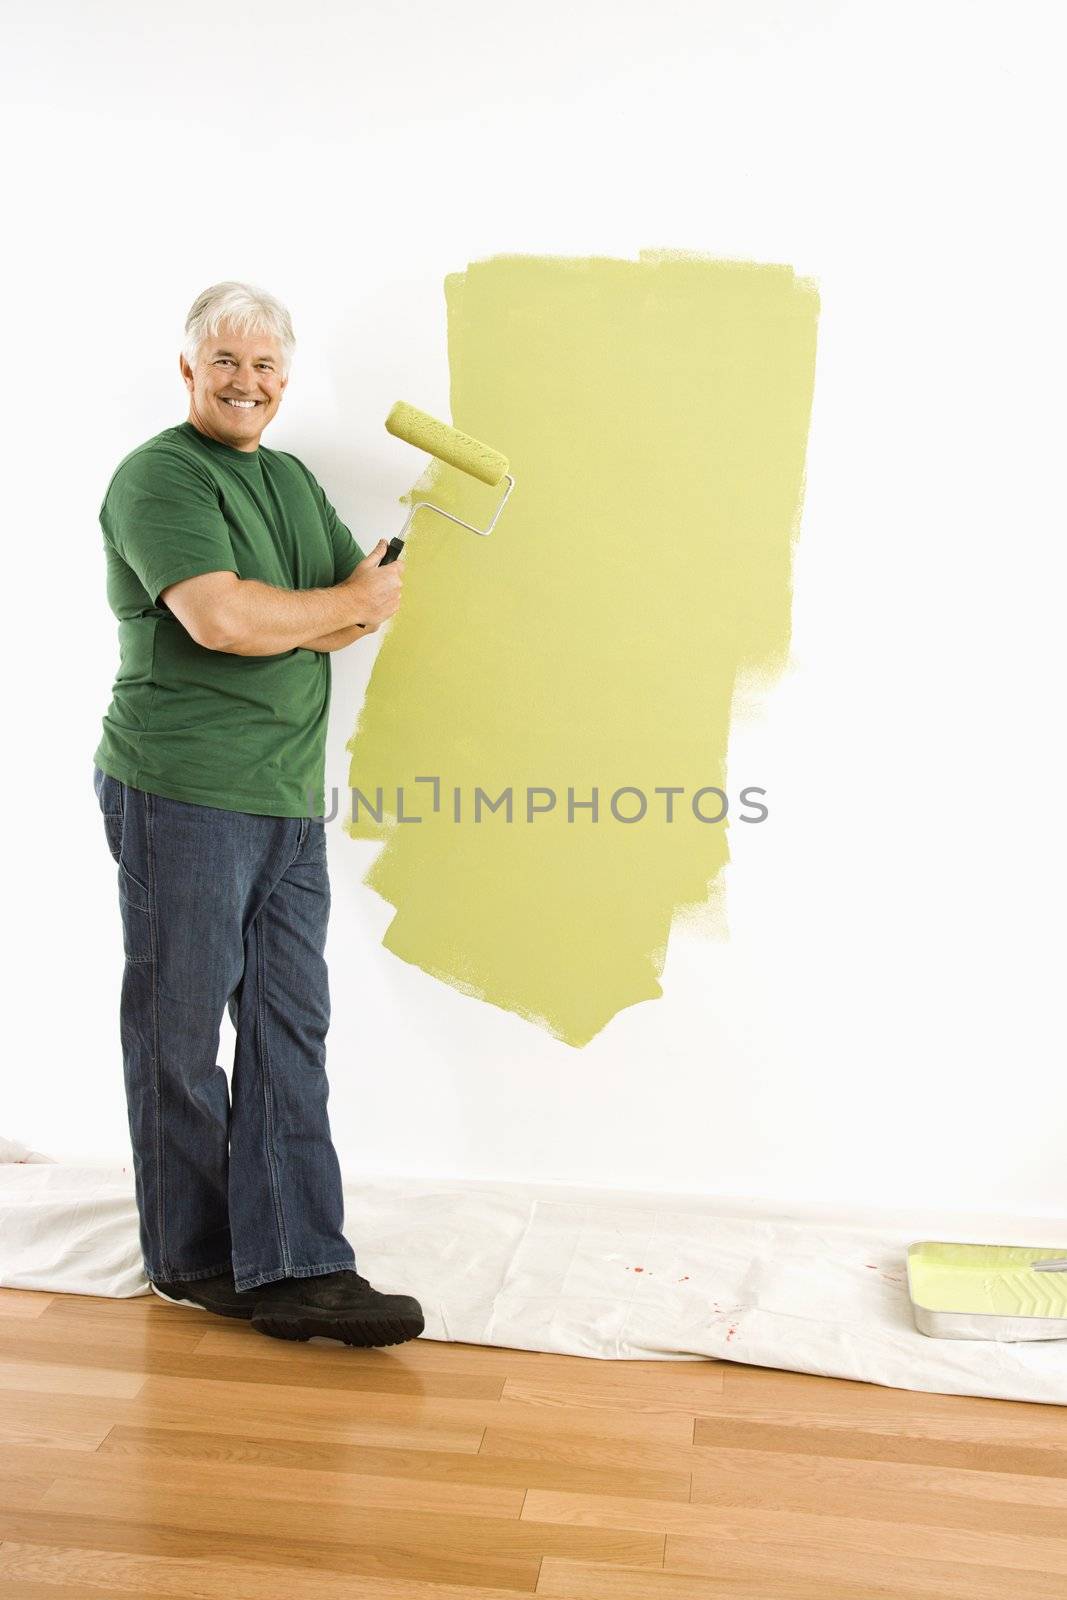 Middle-aged man painting wall green with paint roller smiling at viewer.